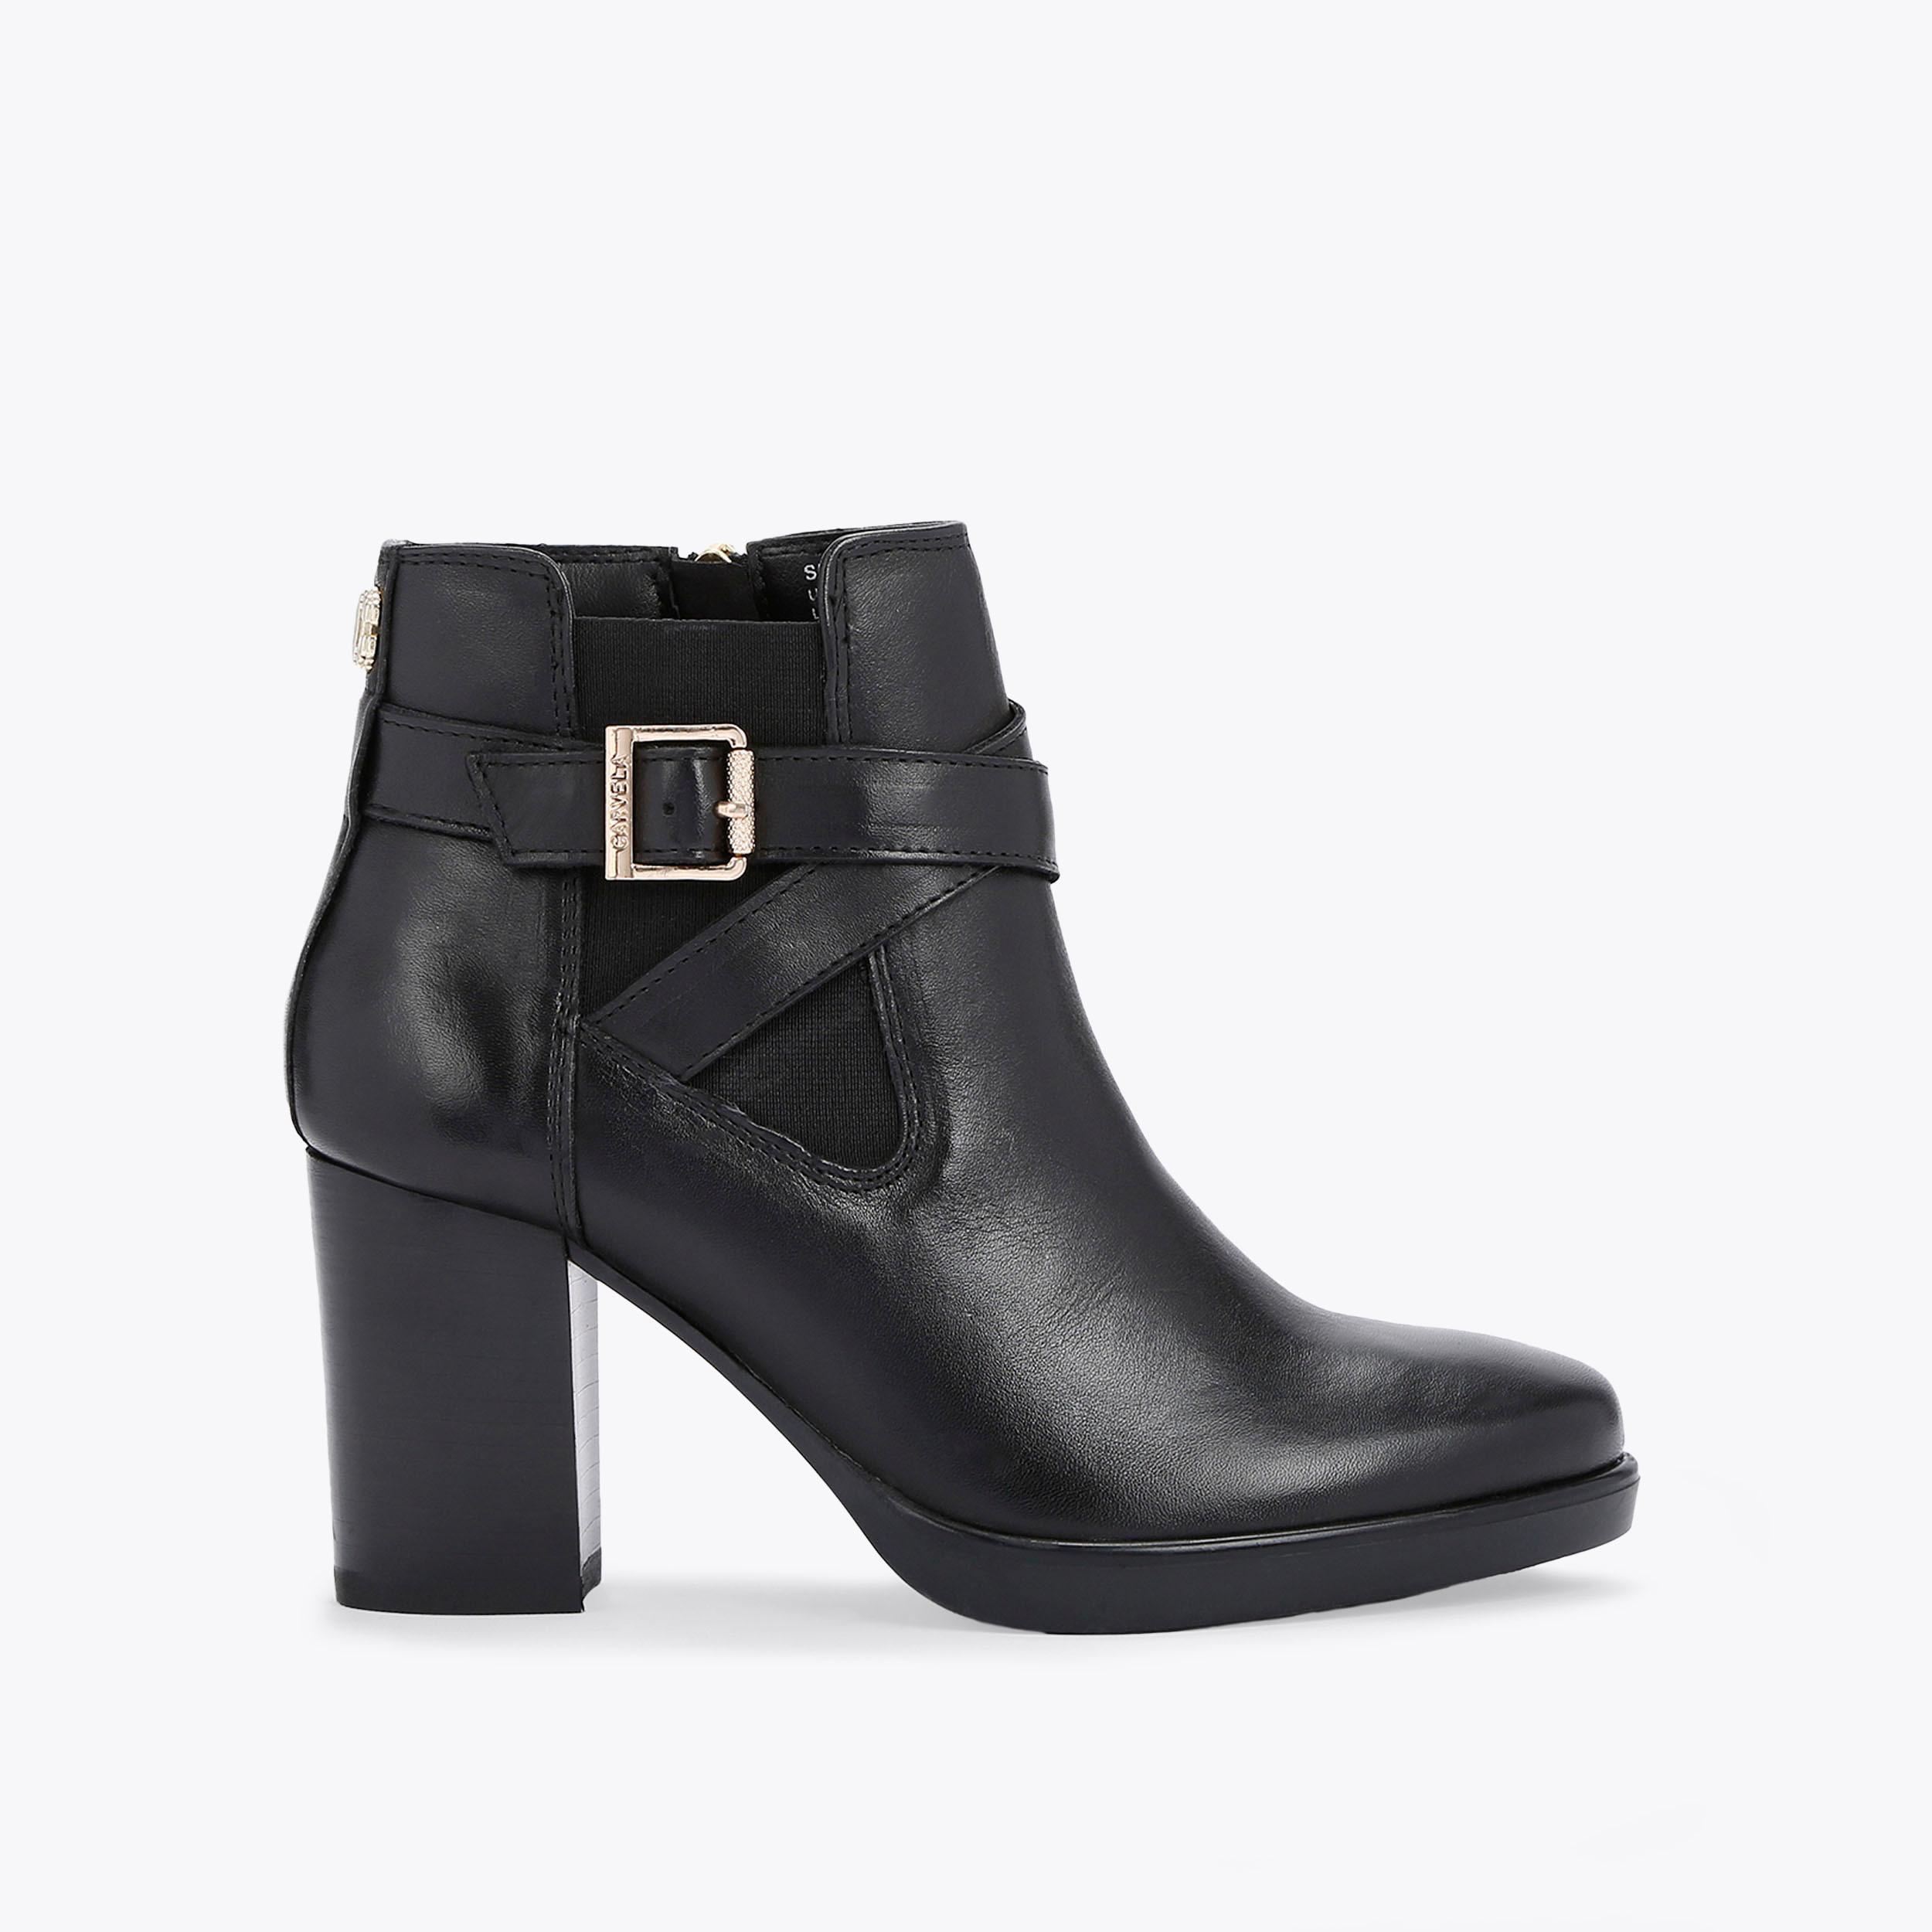 SILVER 2 Black Leather Heeled Ankle Boot by CARVELA